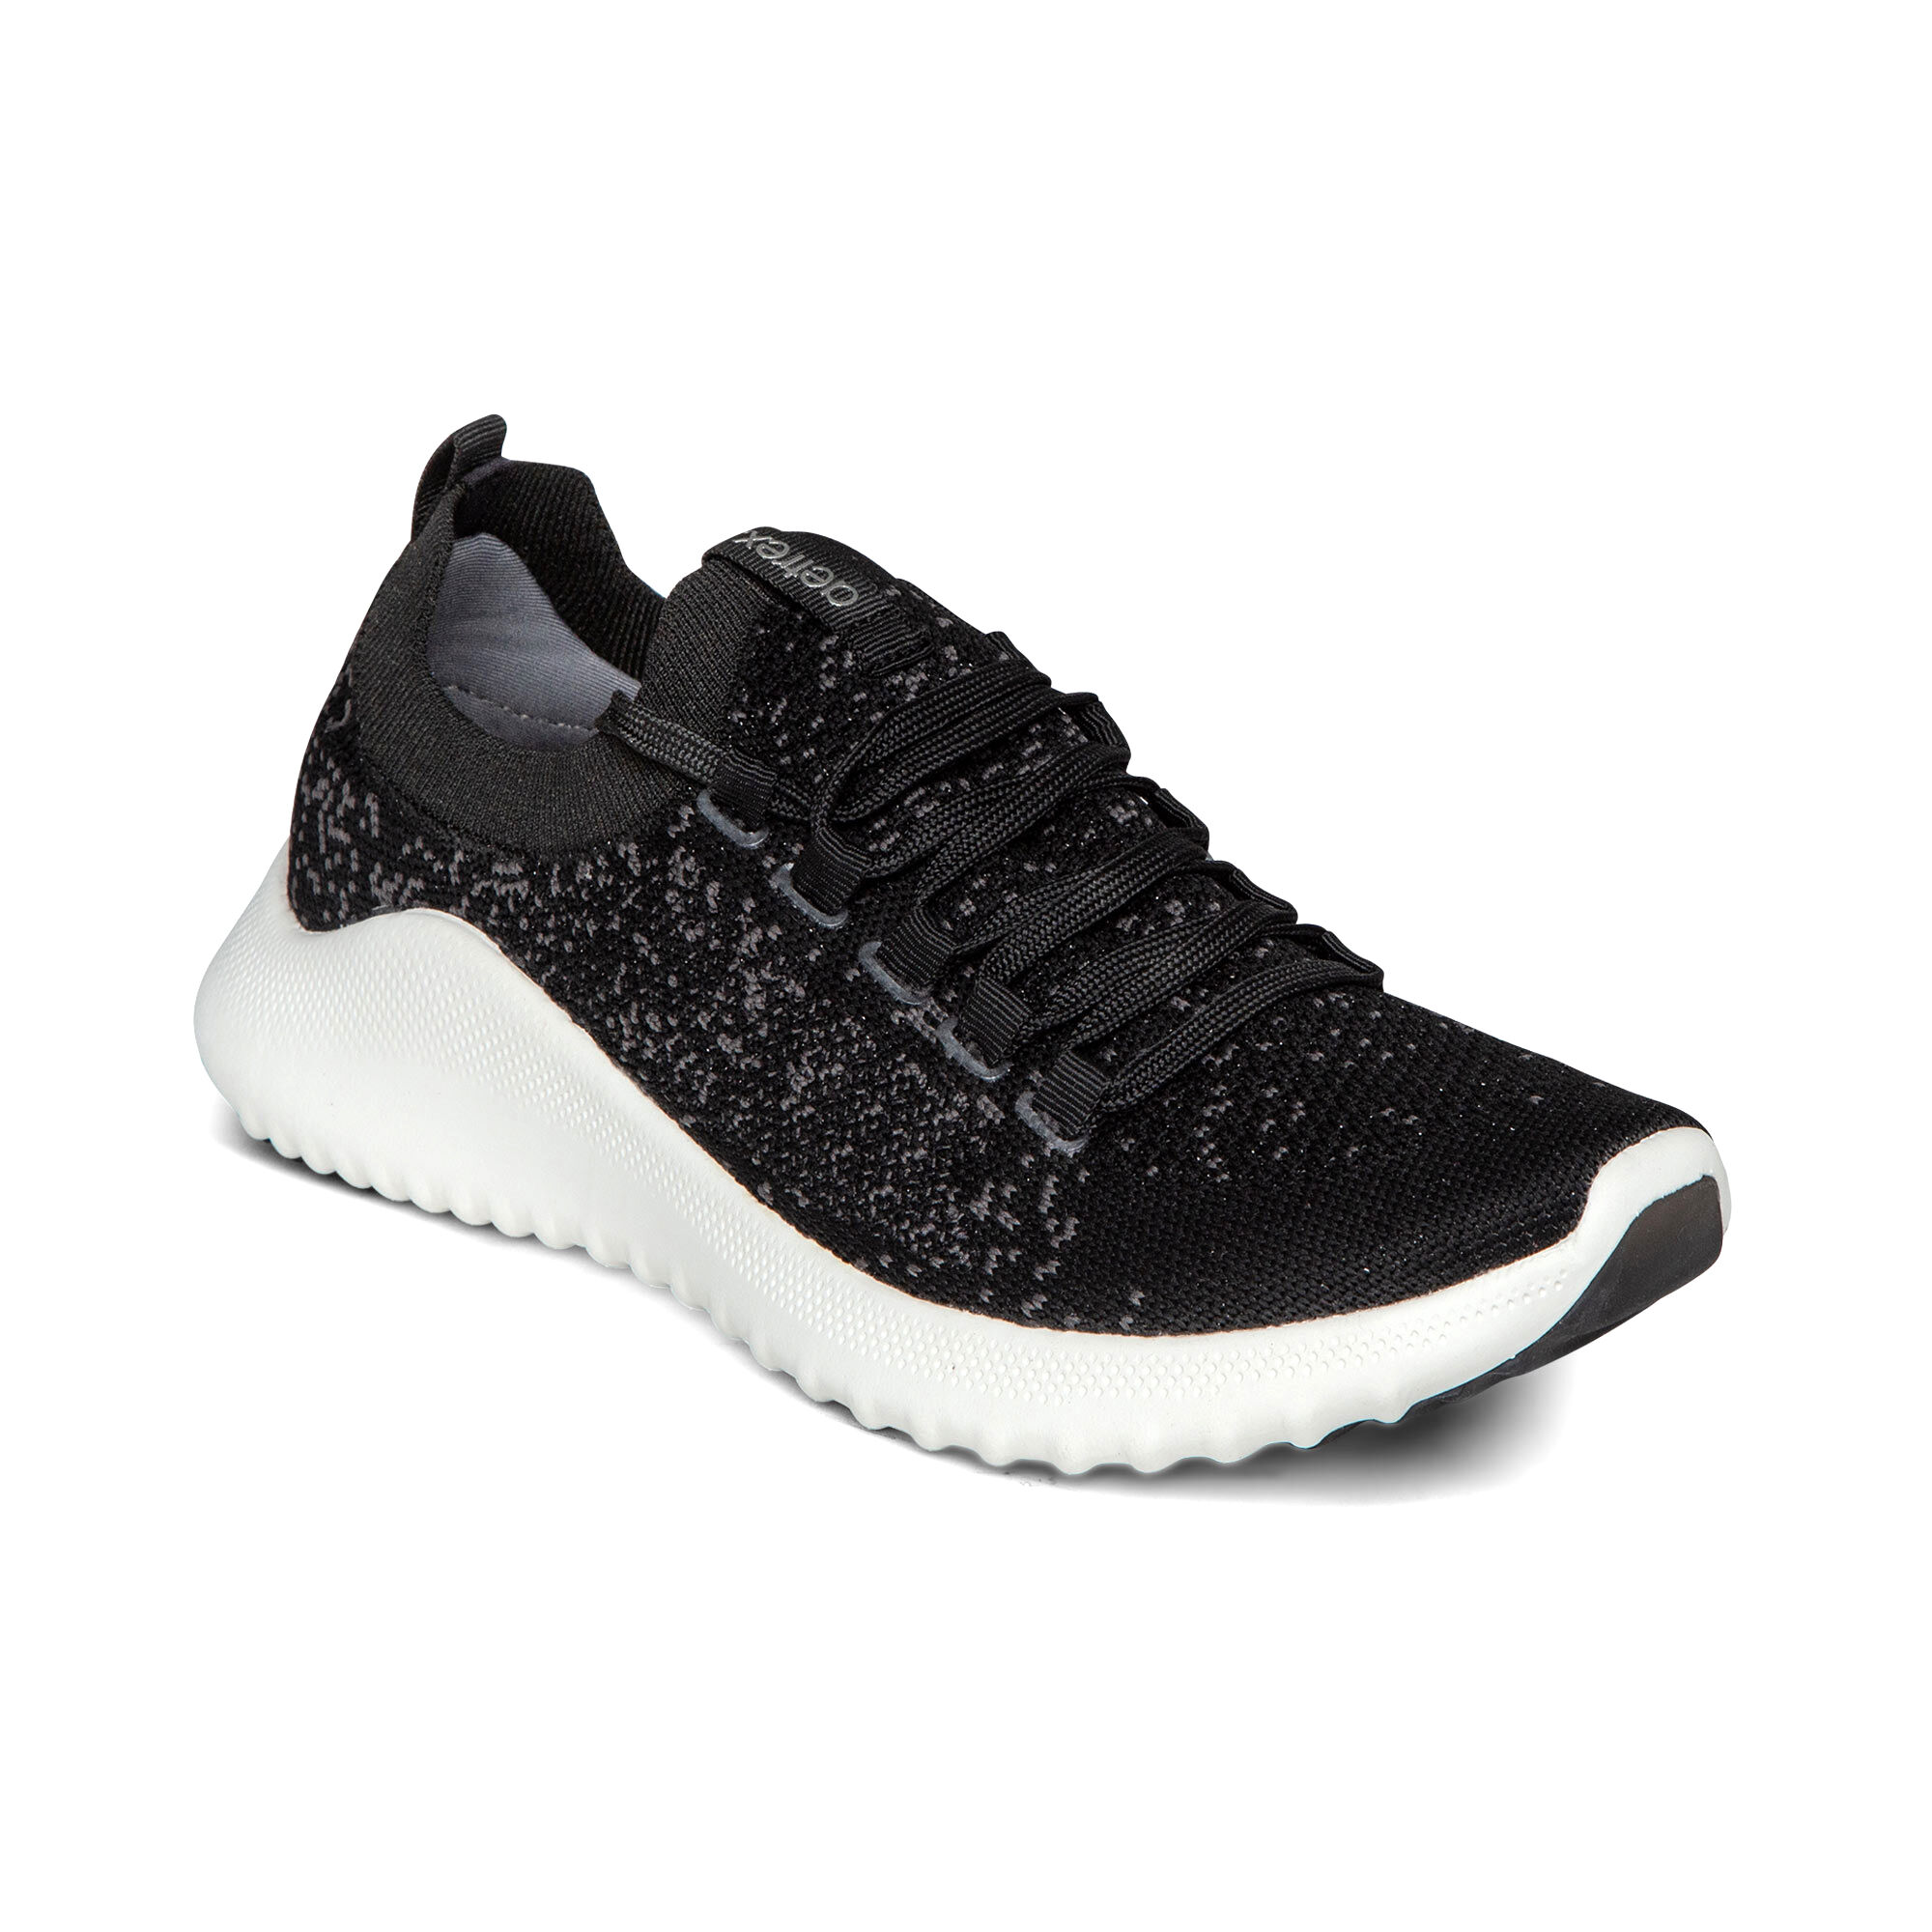 sneaker with arch support